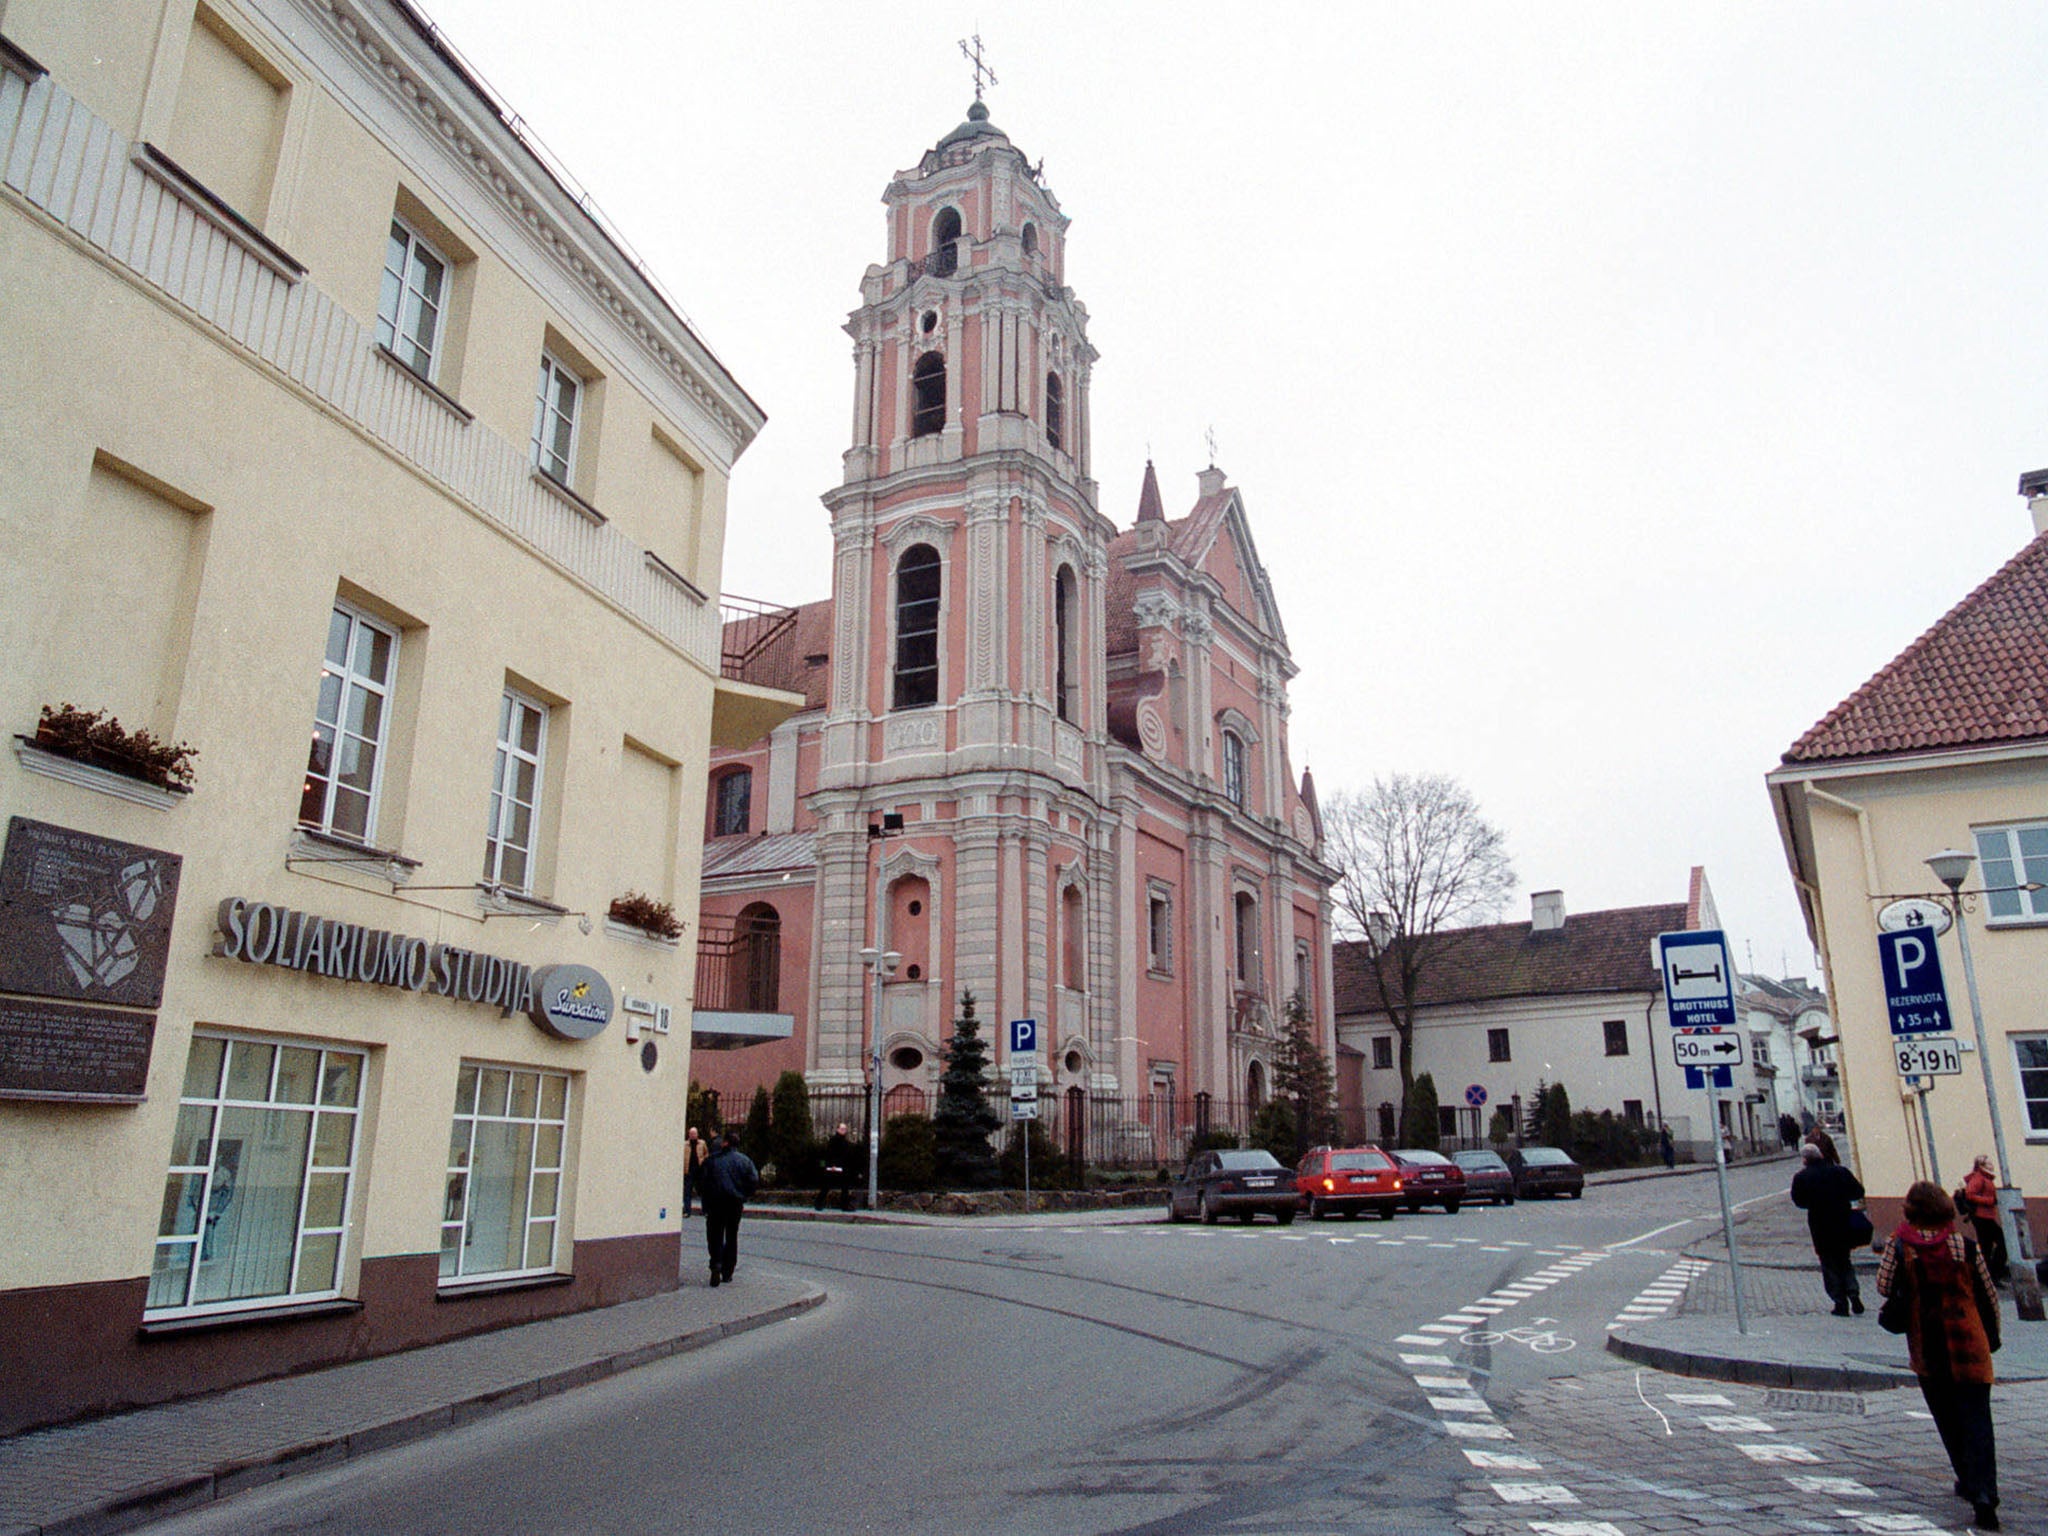 Mark Harold first visited the Lithuanian capital, Vilnius, in 2004 and had made it his home within a year